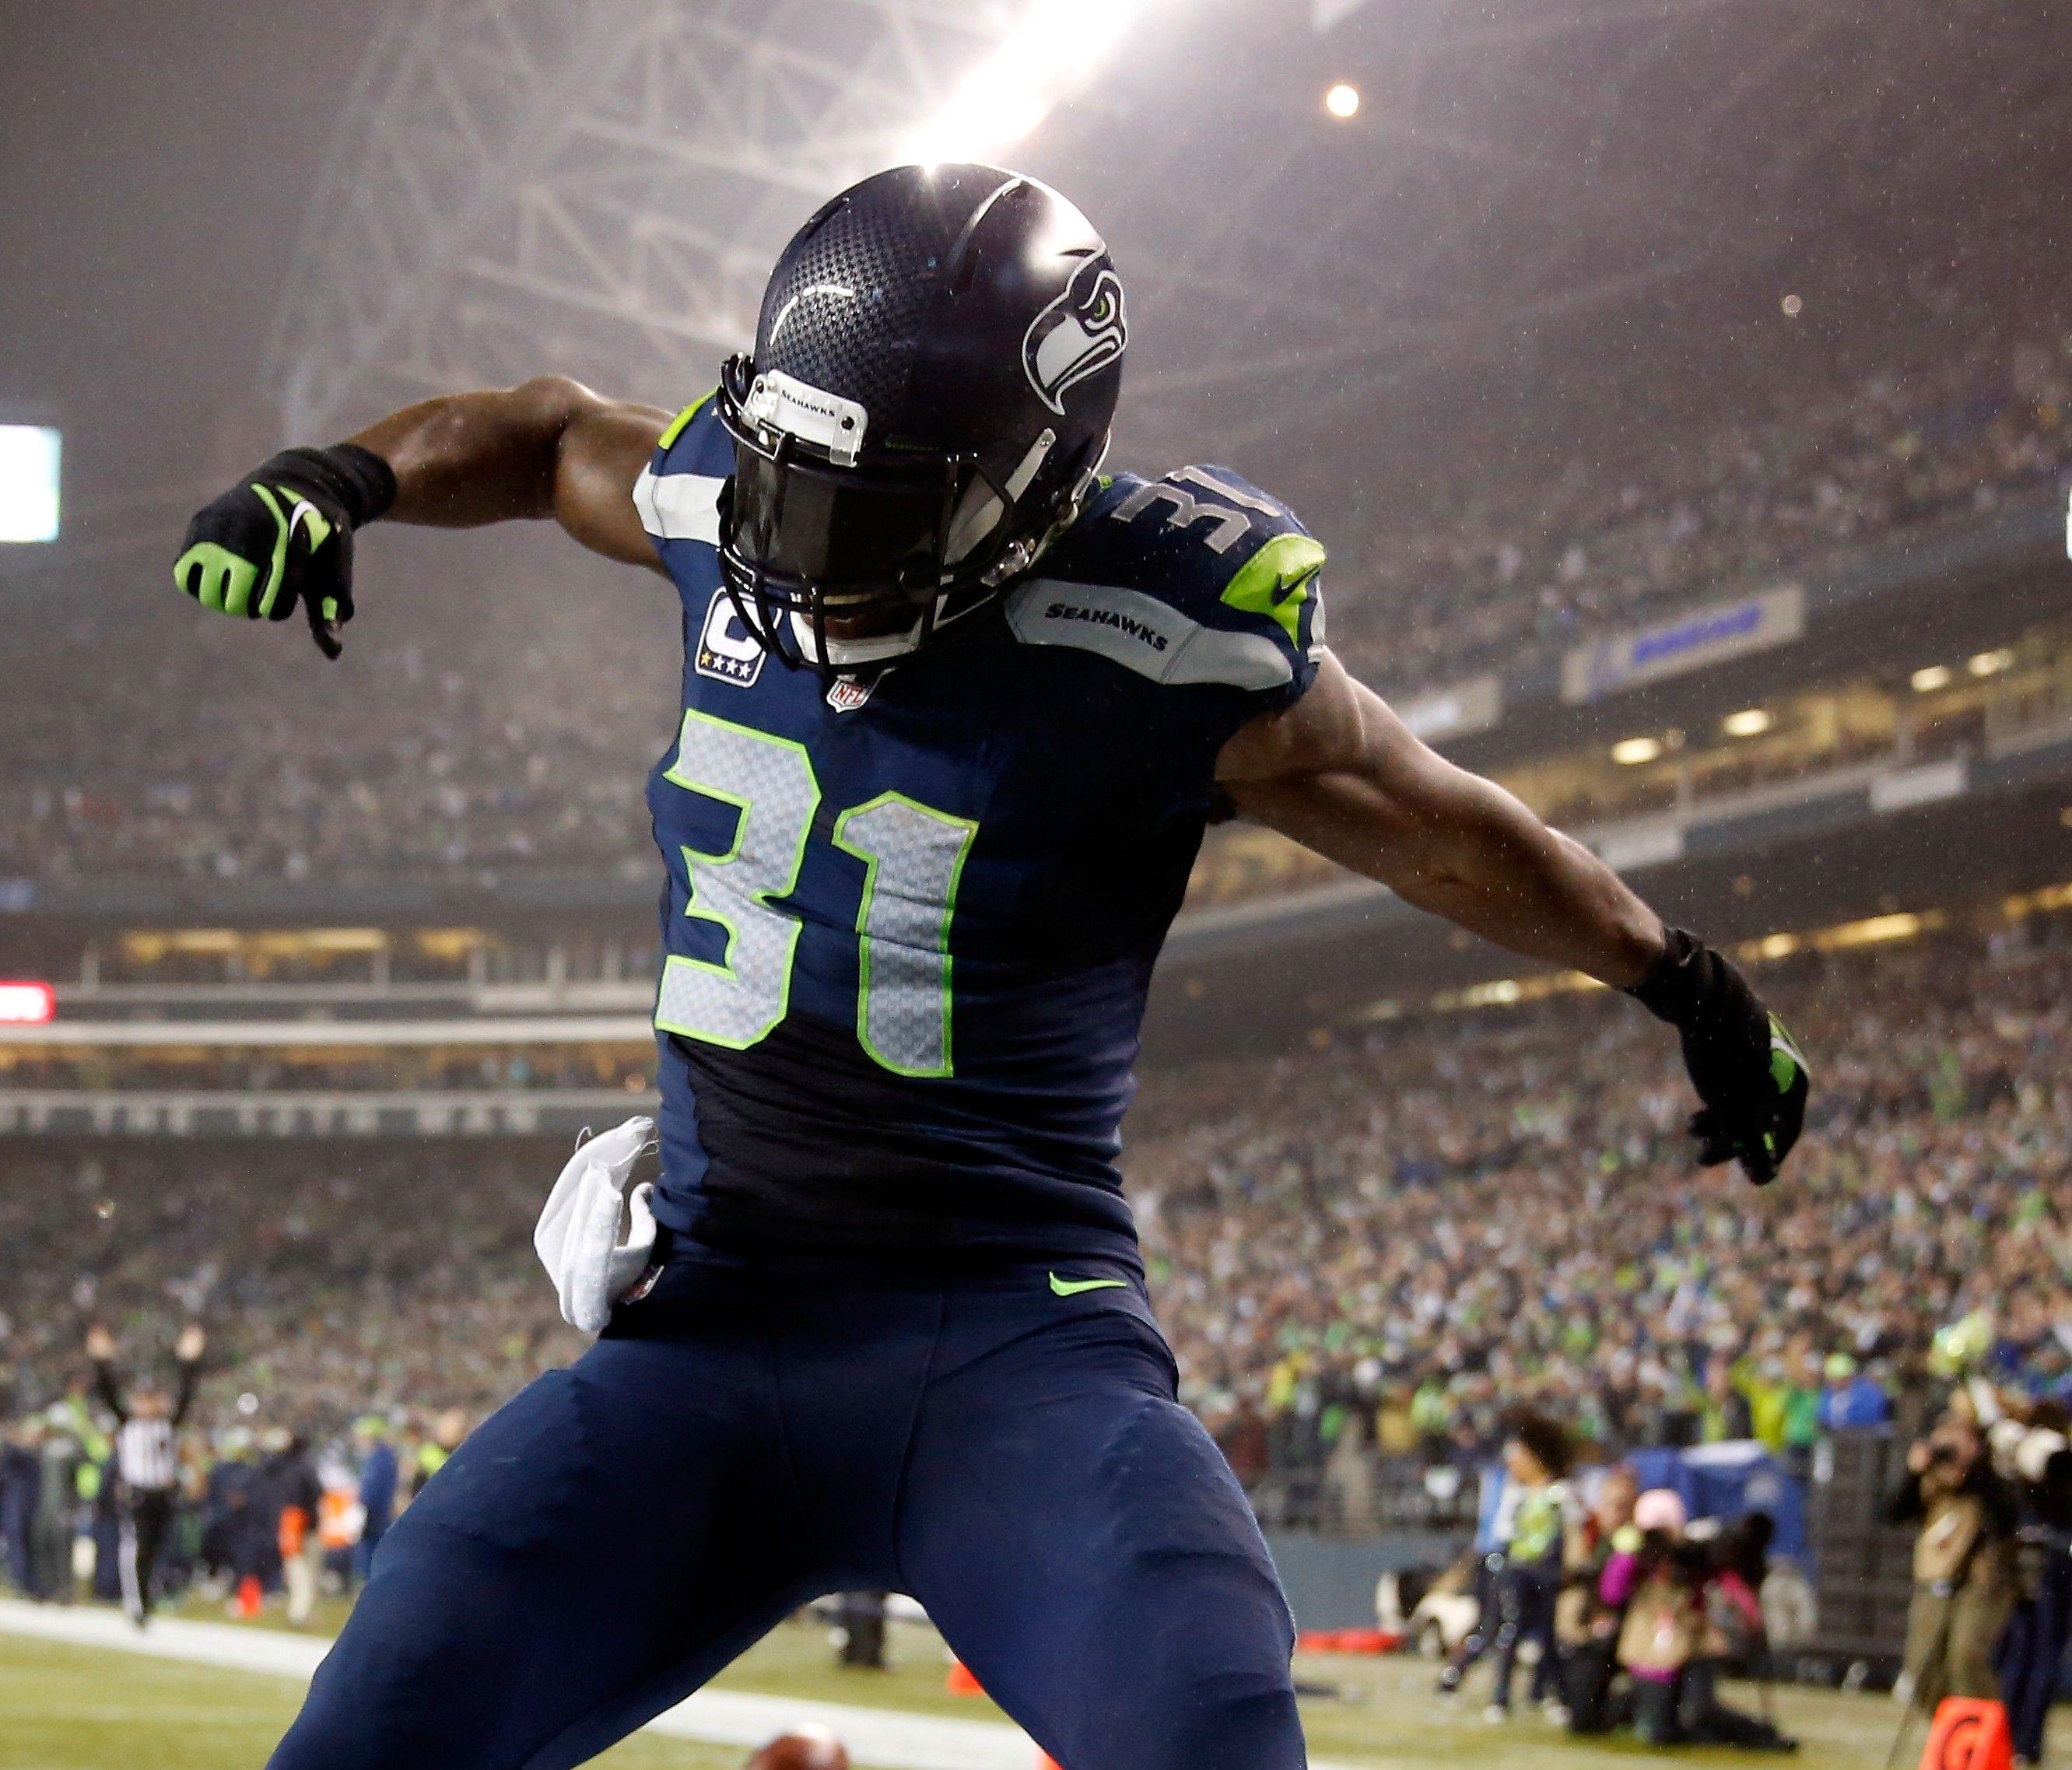 kam chancellor wallpapers wallpaper cave on kam chancellor wallpapers